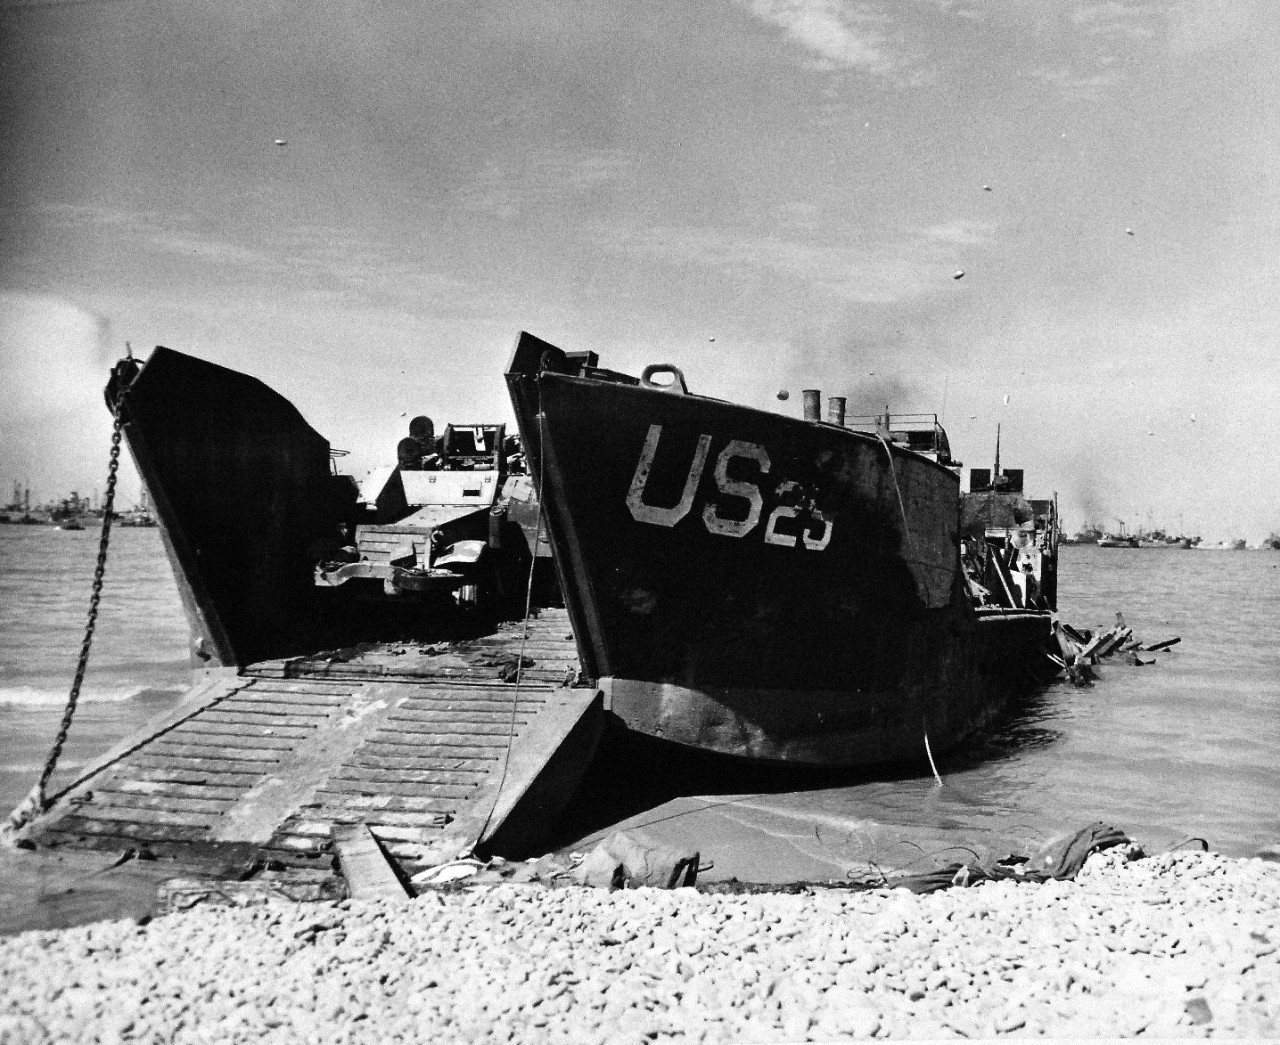 80-G-285210:  Normandy Invasion, U.S. Navy Ships, June 1944. USS LCT 25 unloading an armored car on Normandy Beach, France.  In background are Allied ships.  Photograph released November 7, 1944.  U.S. Navy photograph, now in the collections of the National Archives.  (2016/03/15).